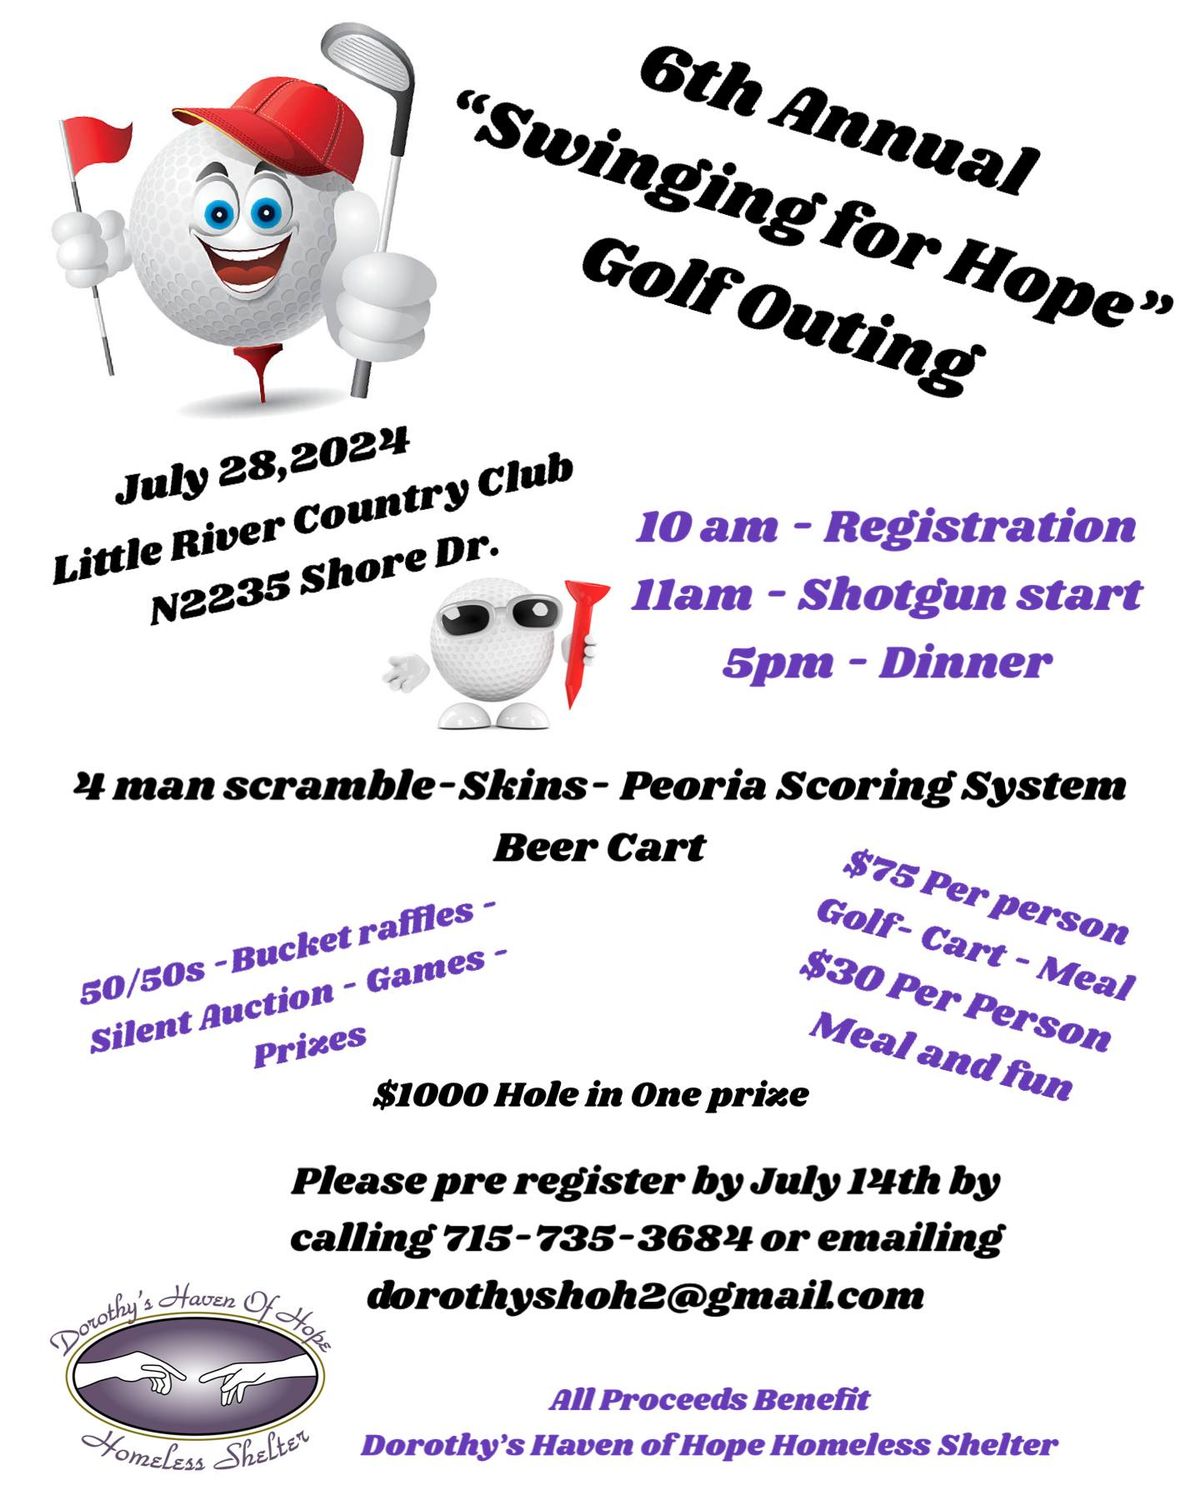 Dorothy's Haven of Hope Golf Outing